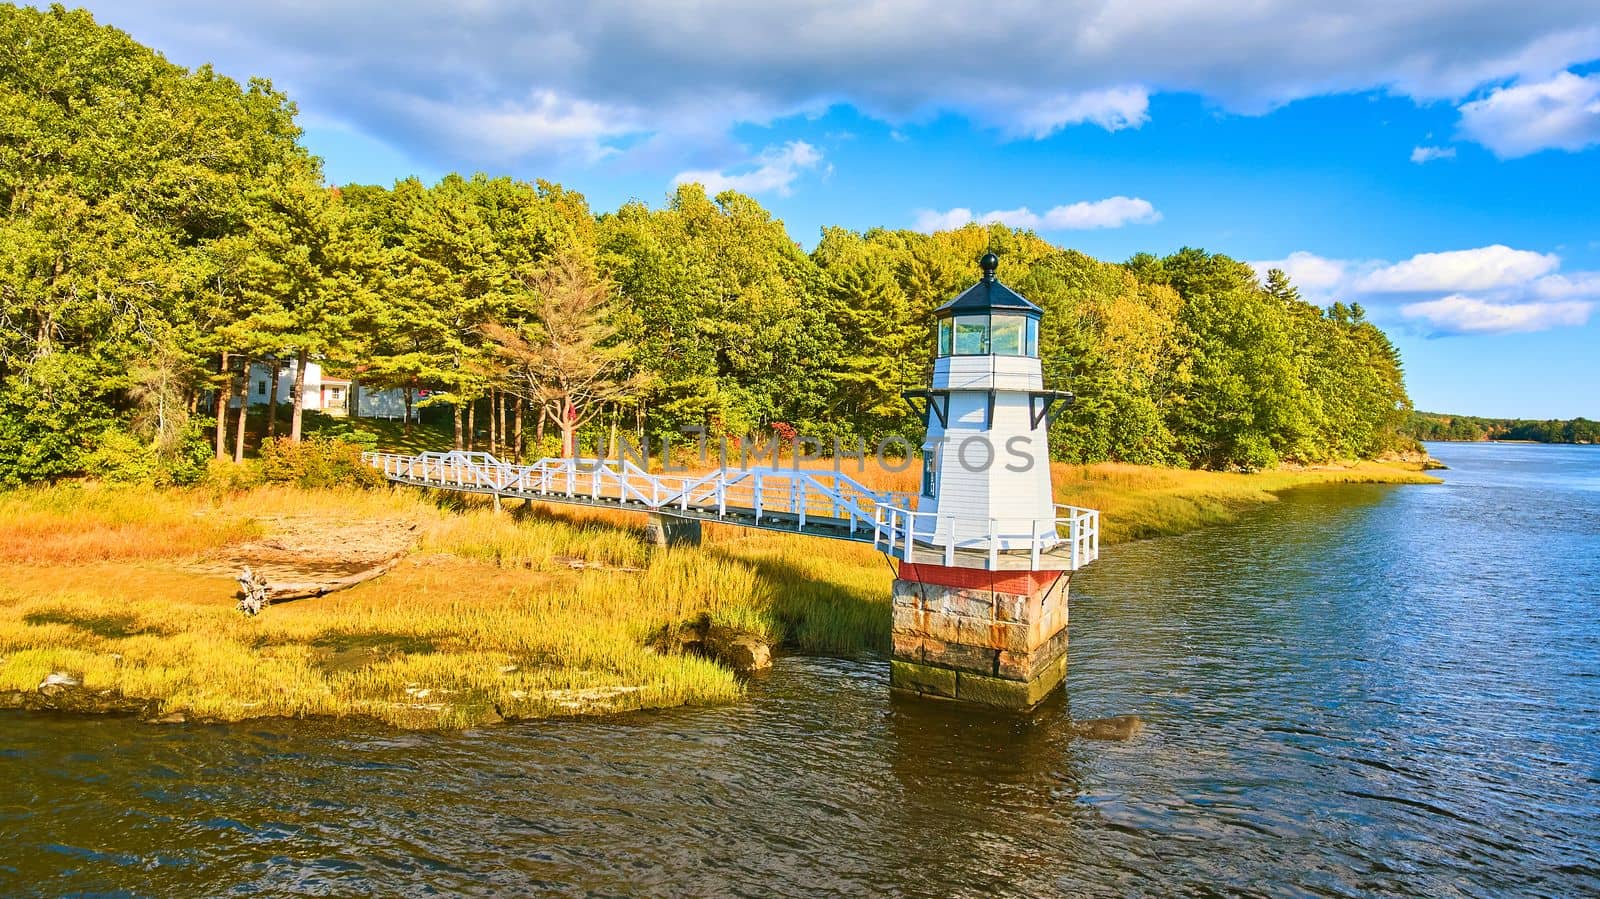 Image of Fall foliage on coast with small lighthouse in Maine and walkway